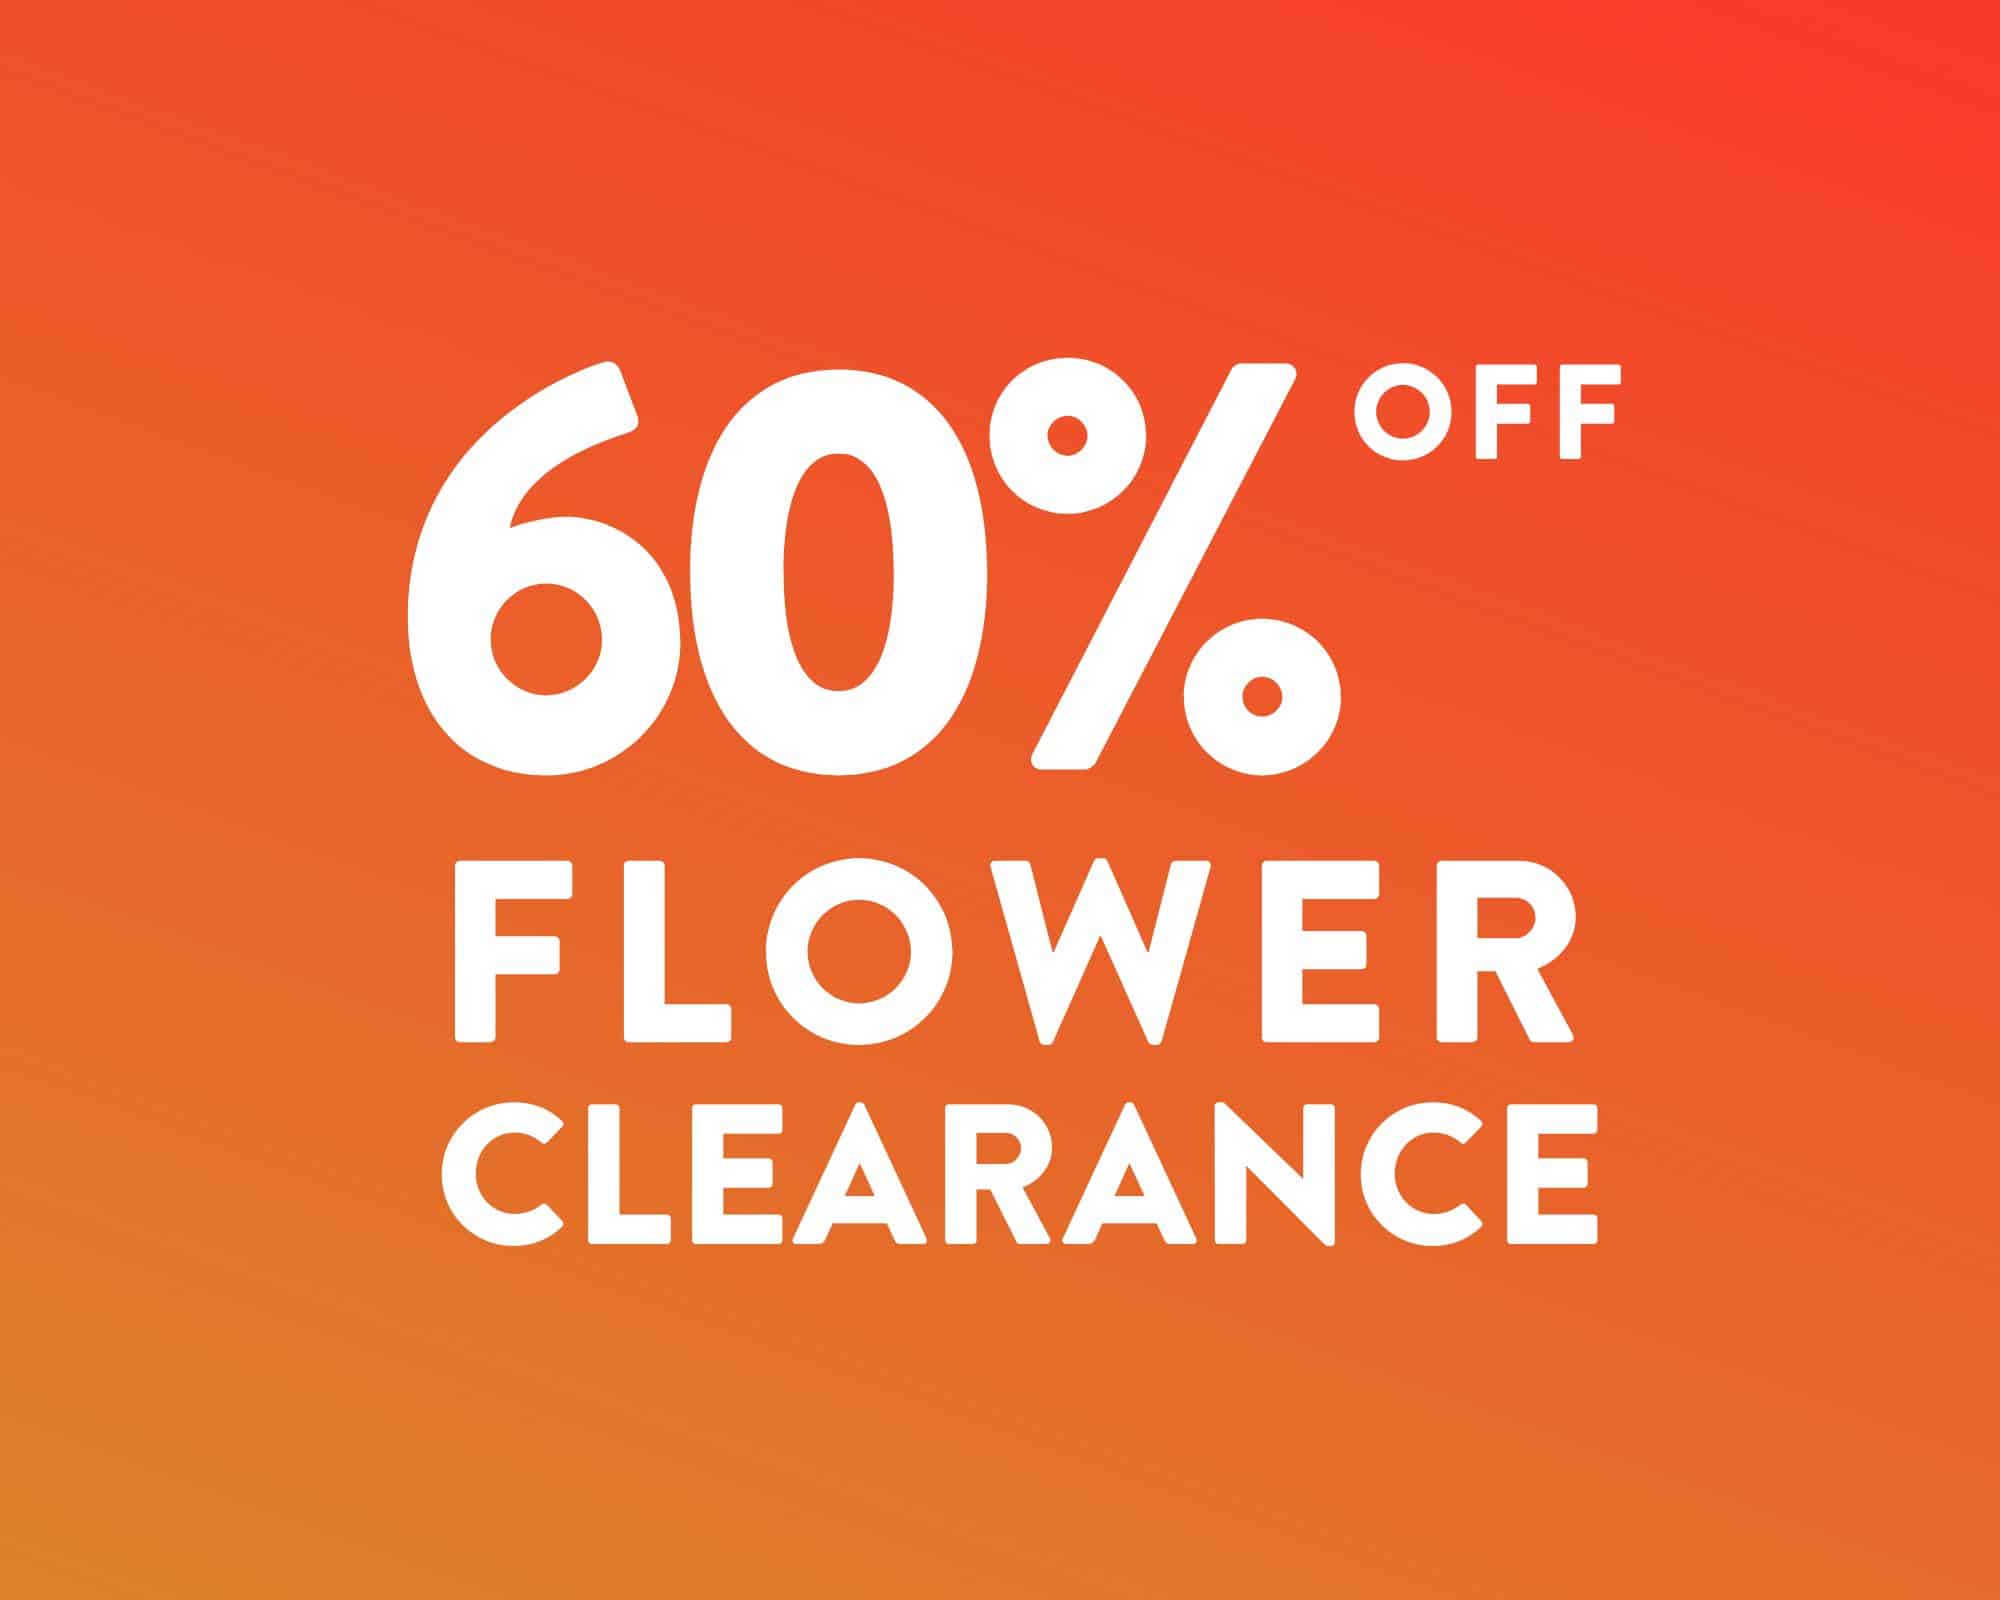 60% off Flower Clearance